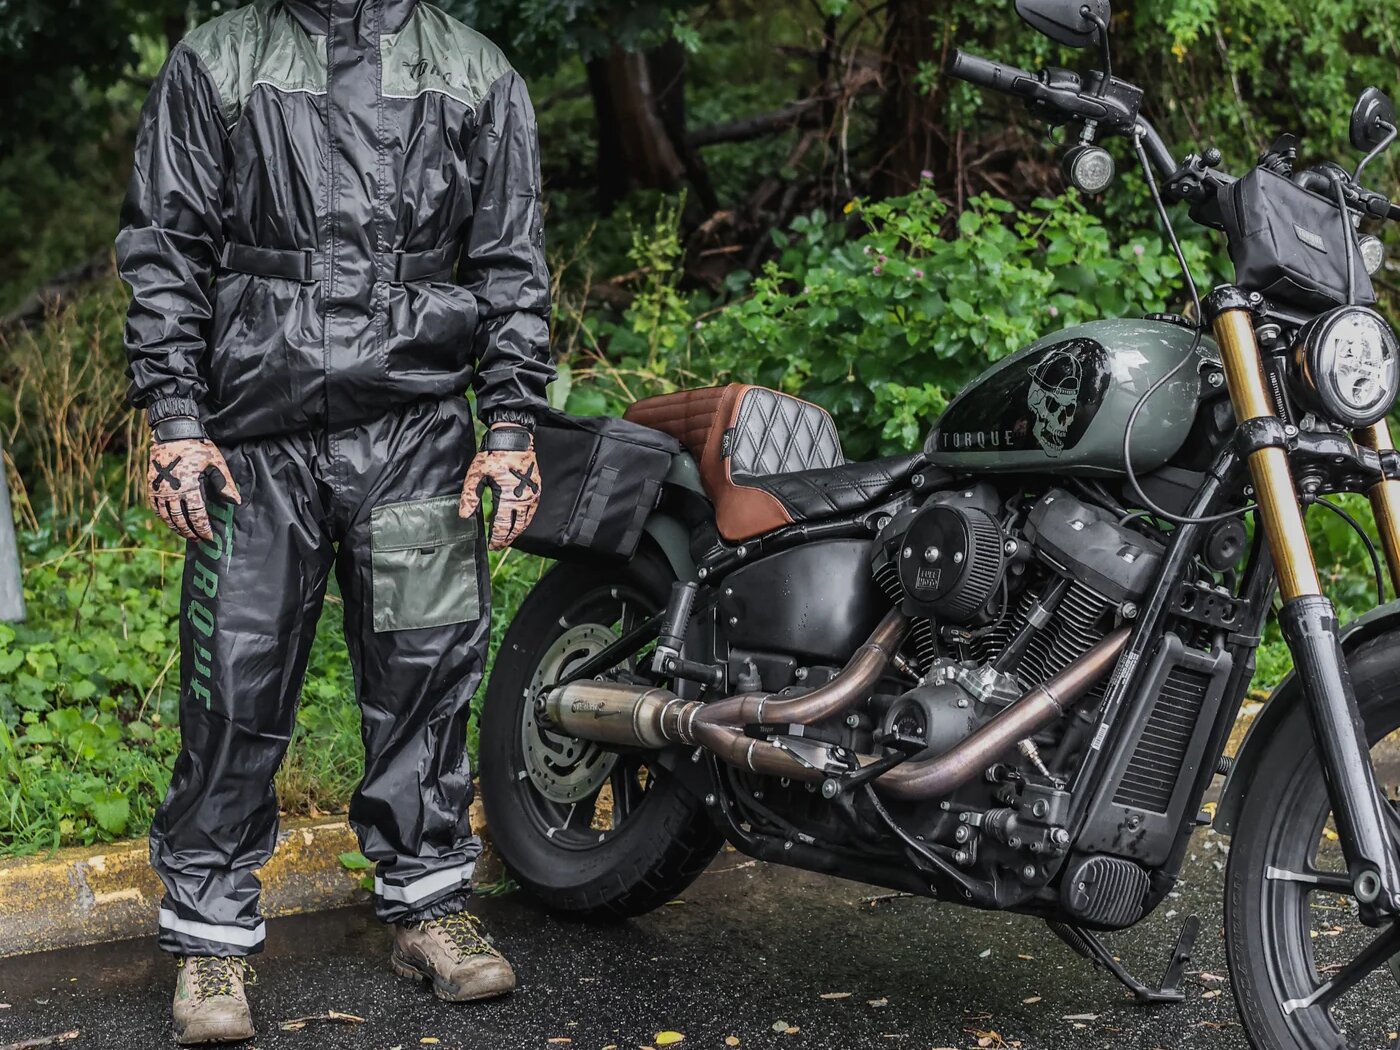 Should You Cover Your Motorcycle in the Rain? The Downpour Dilemma